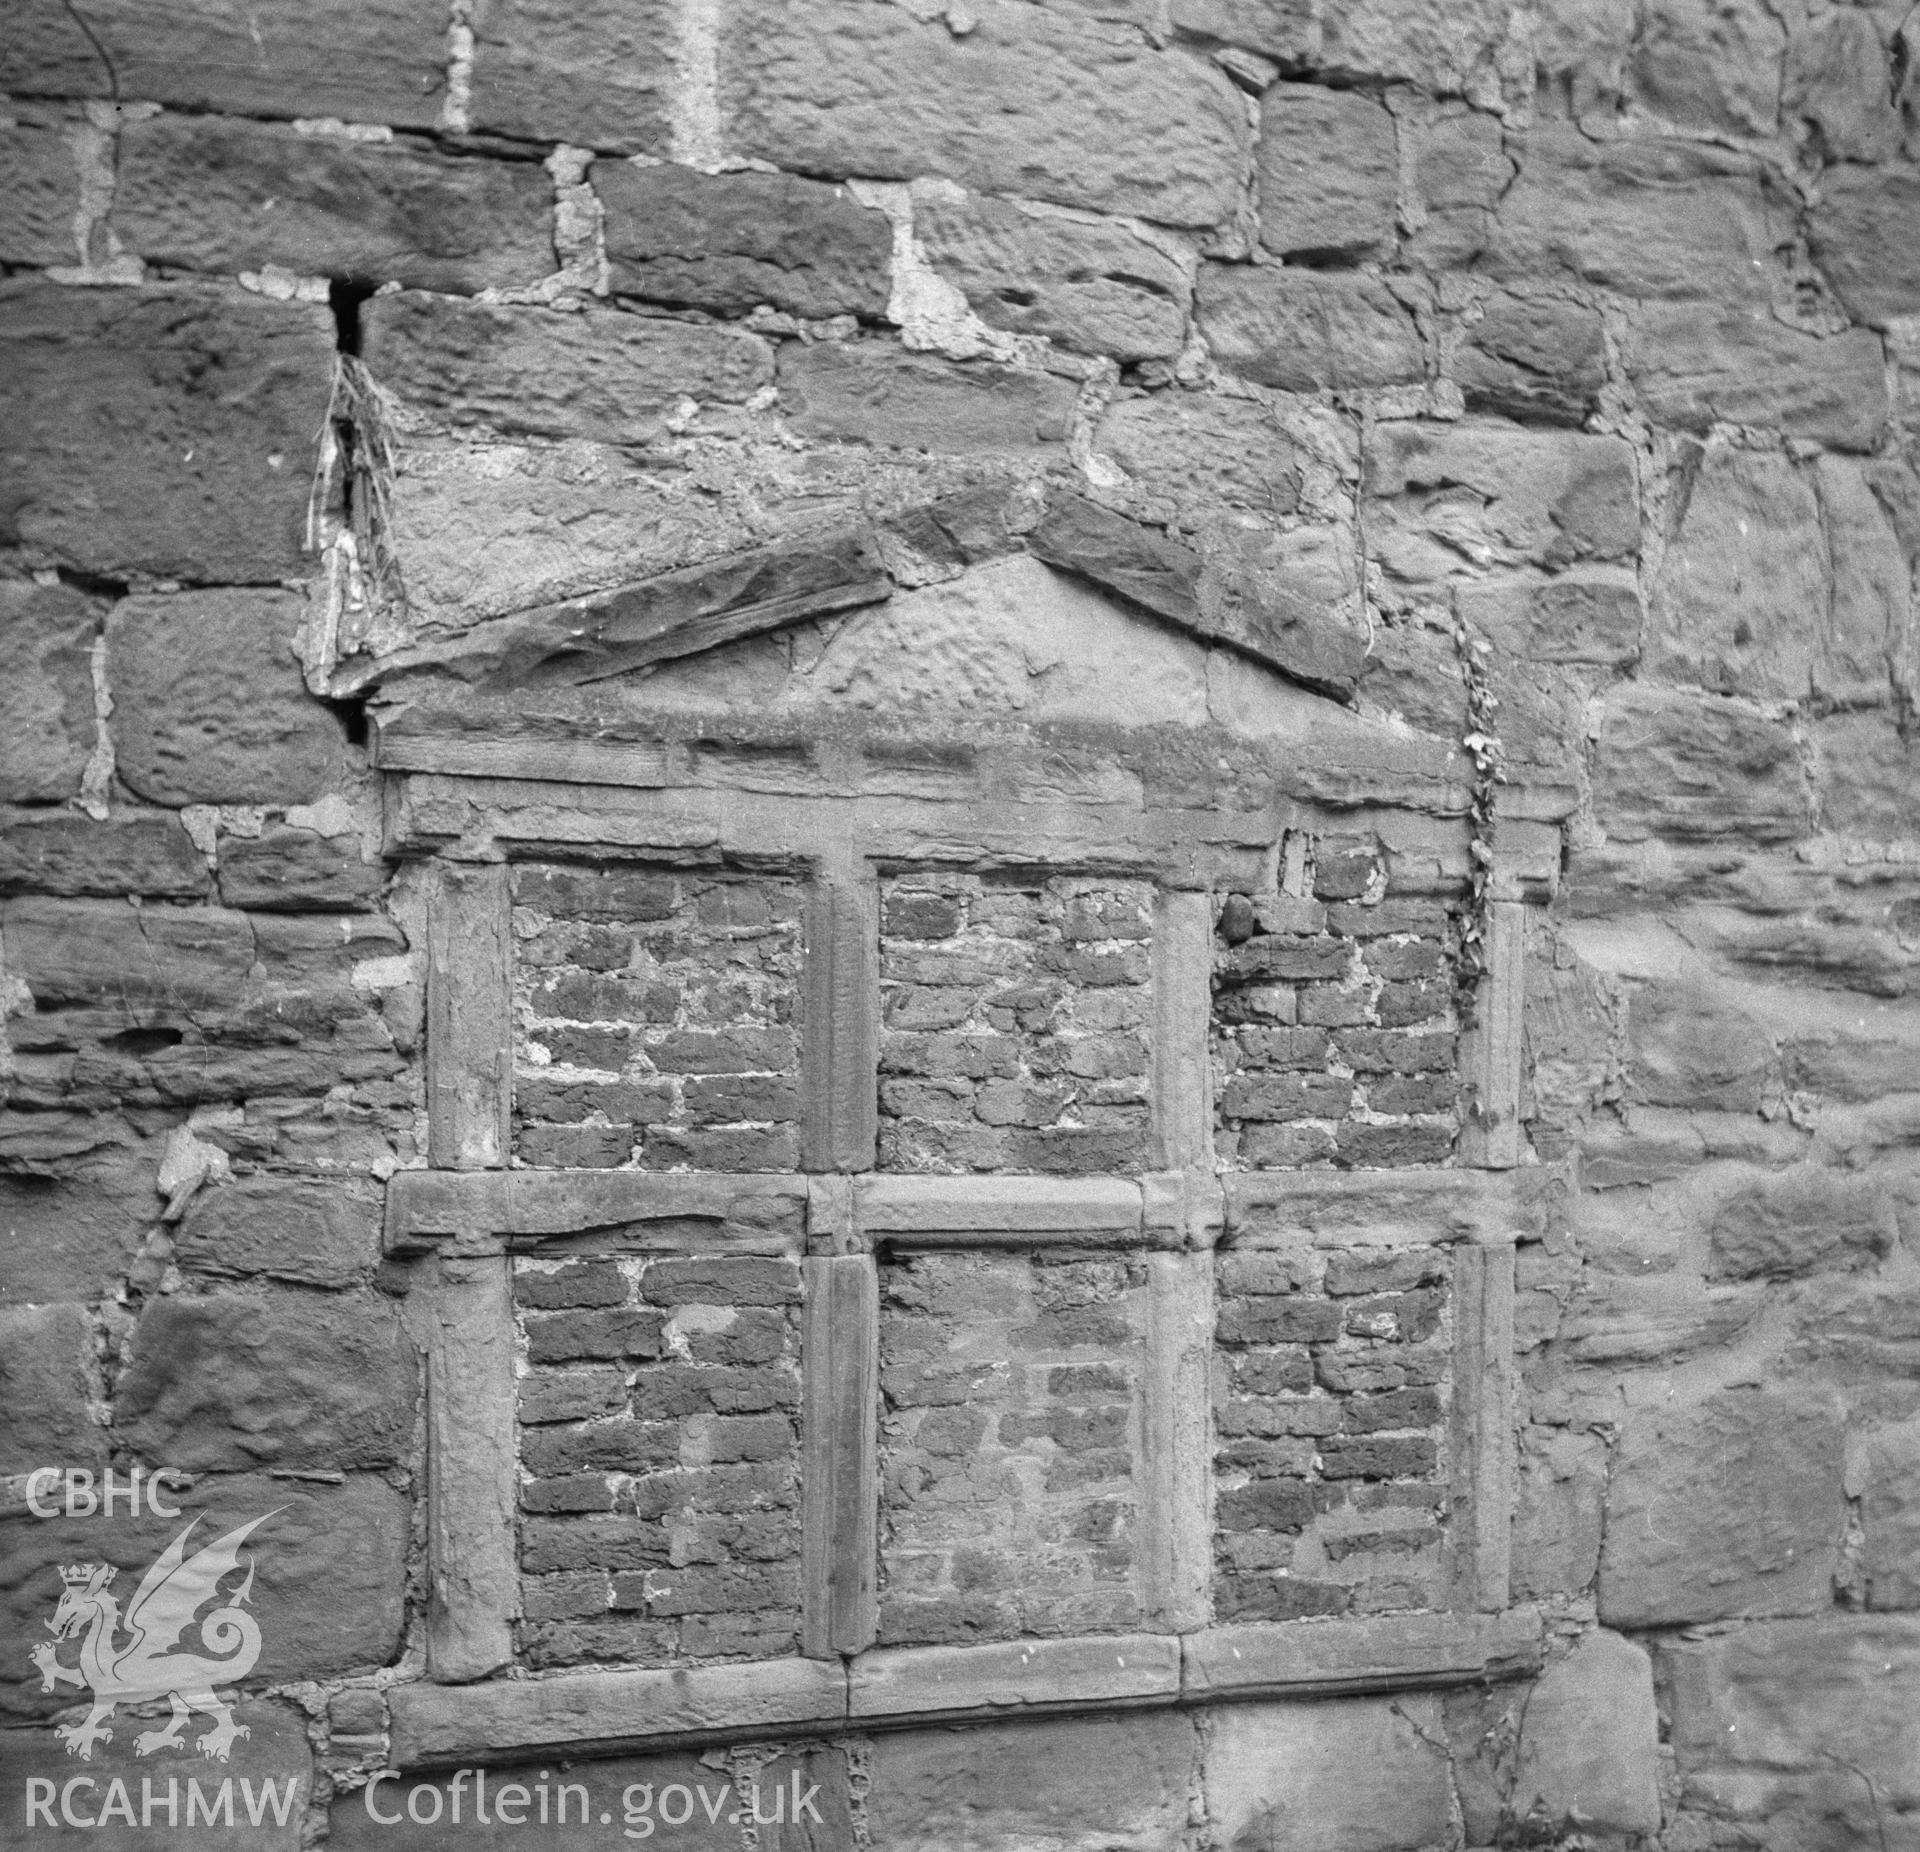 Digital copy of black and white nitrate negative, exterior view showing altered fenestration, Llyseurgain, Northop.